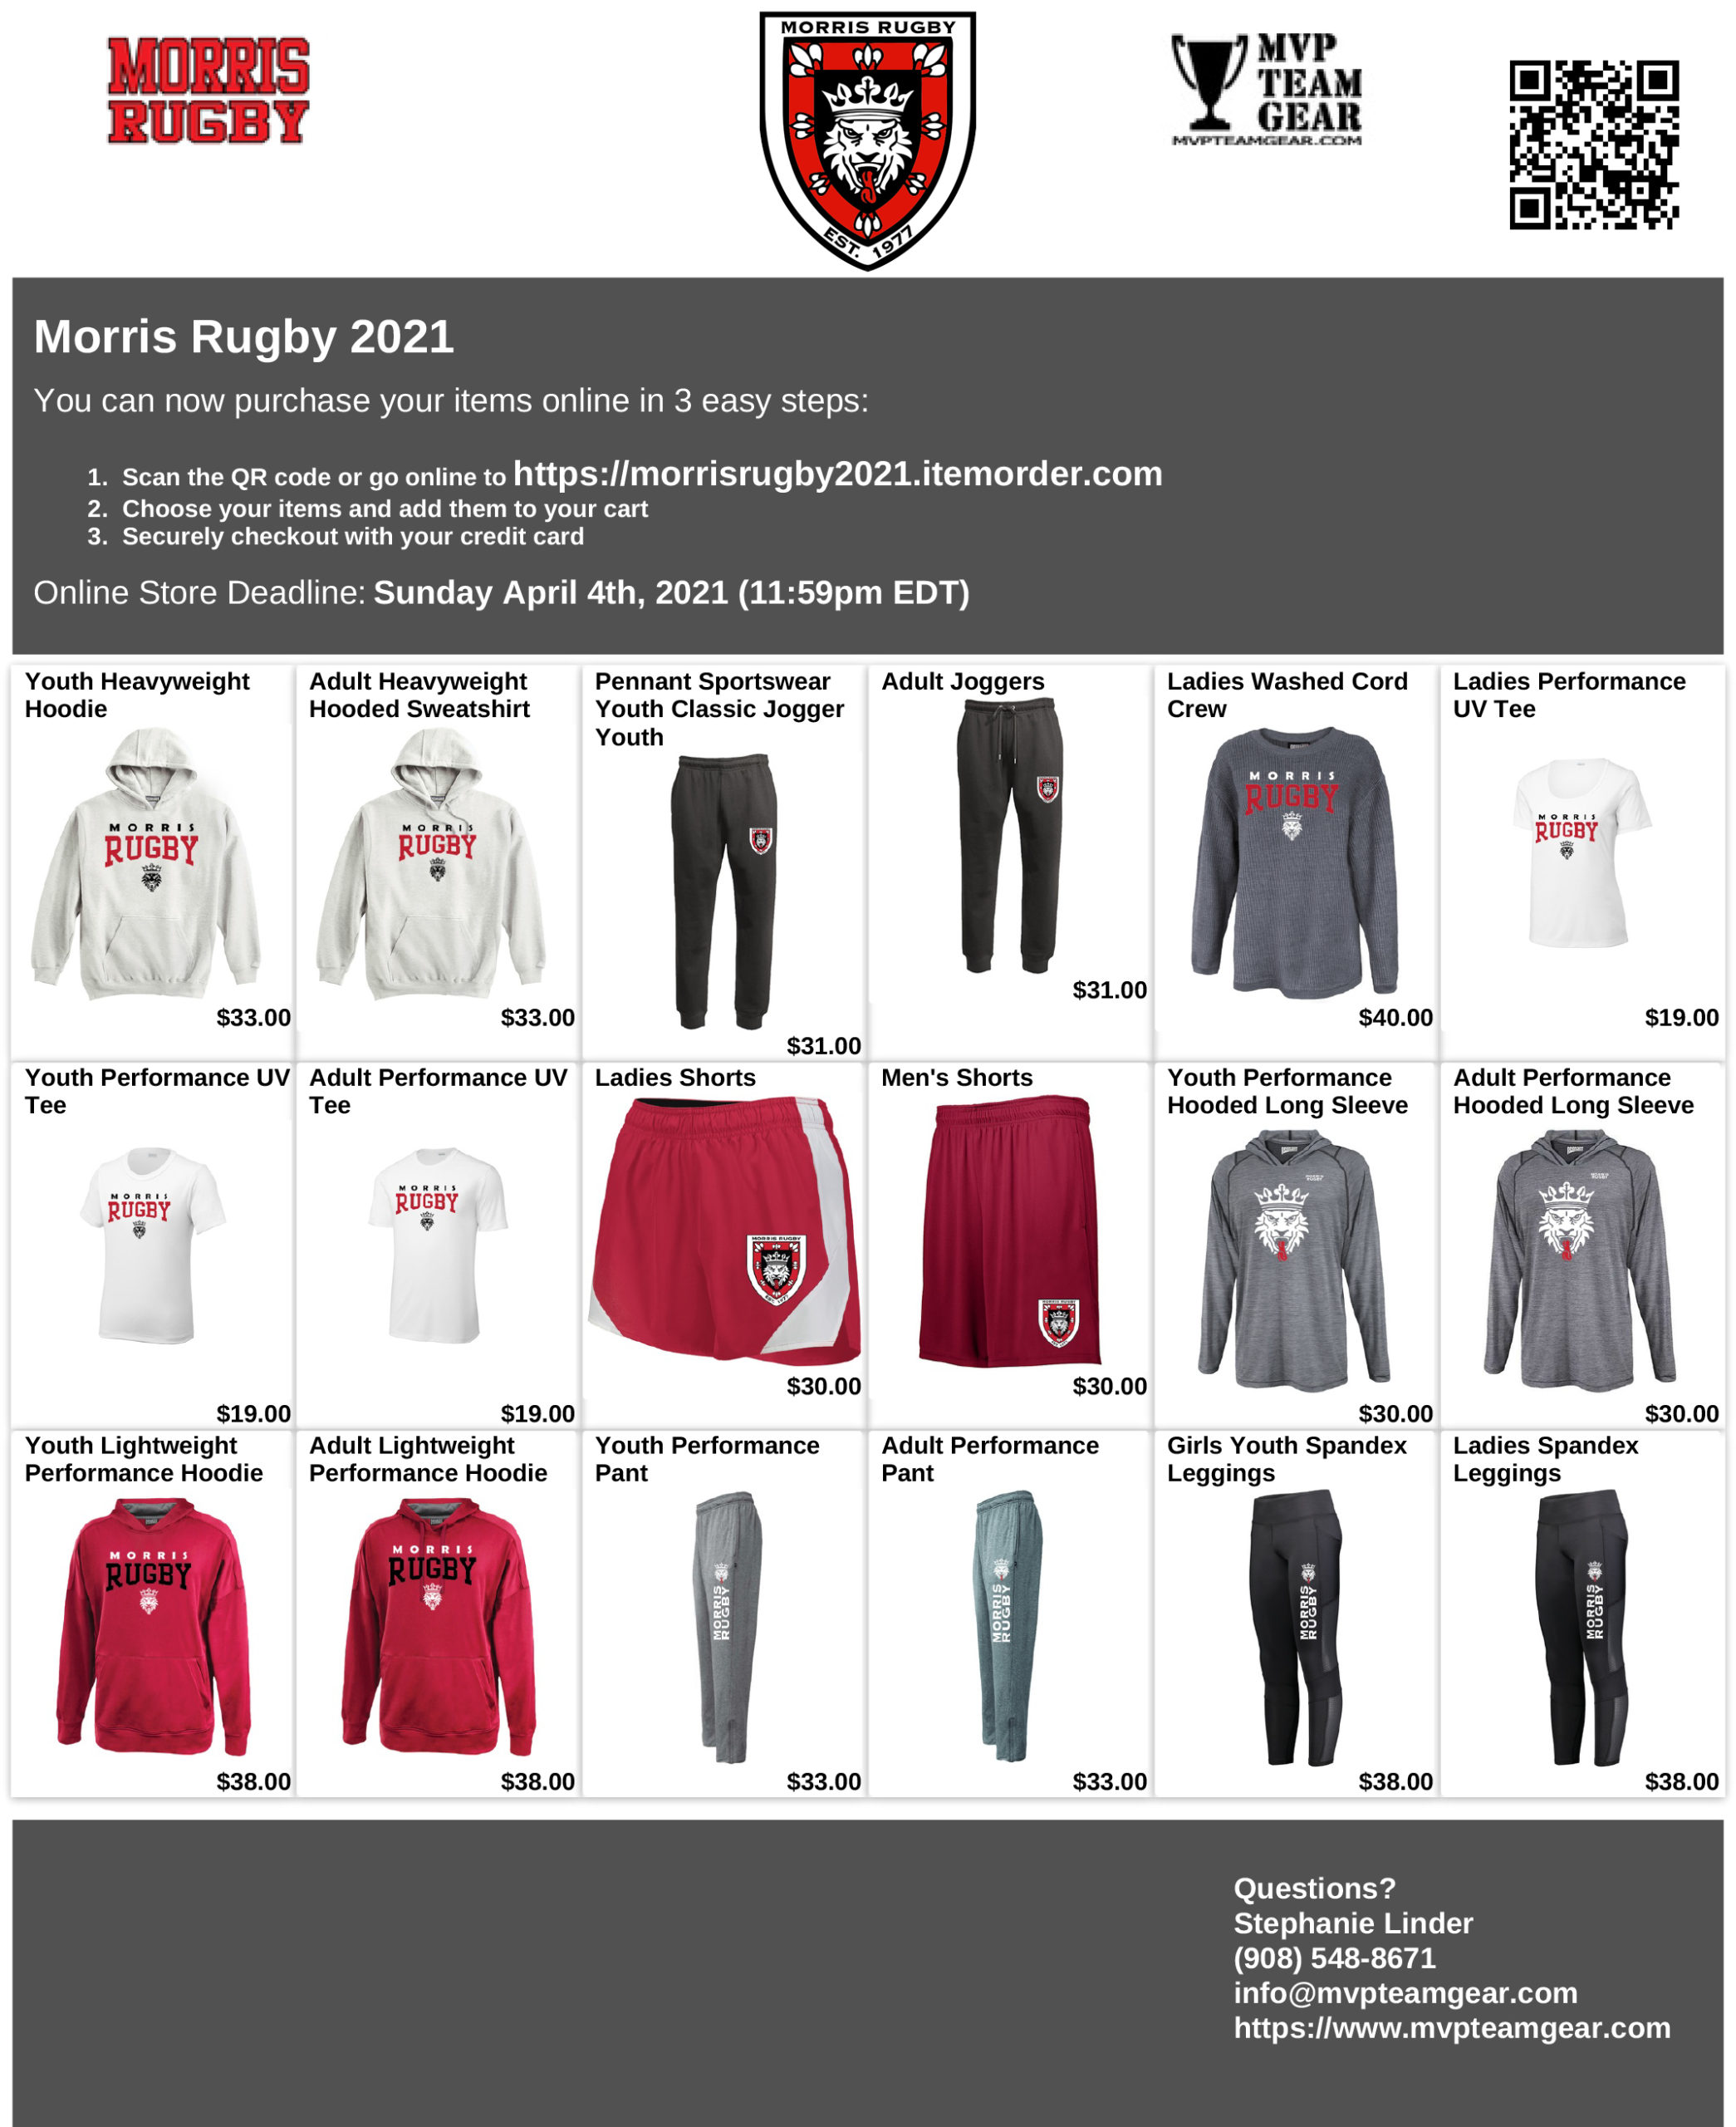 Morris Rugby Spring Store Now Open Through Sunday, April 4th